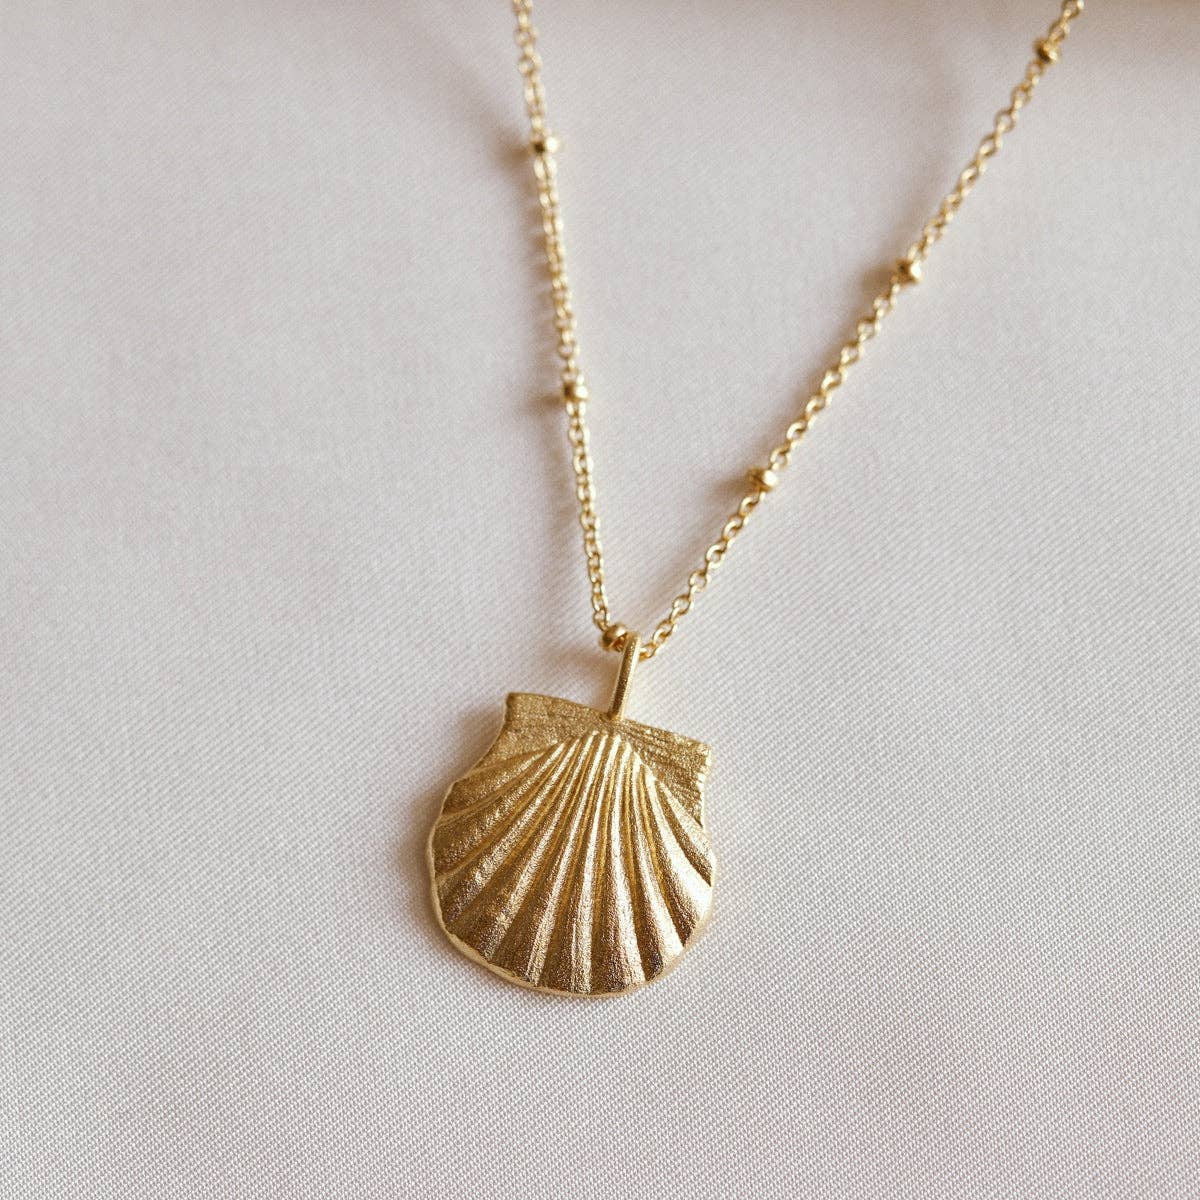 Milos Necklace | Jewelry Gold Gift Waterproof